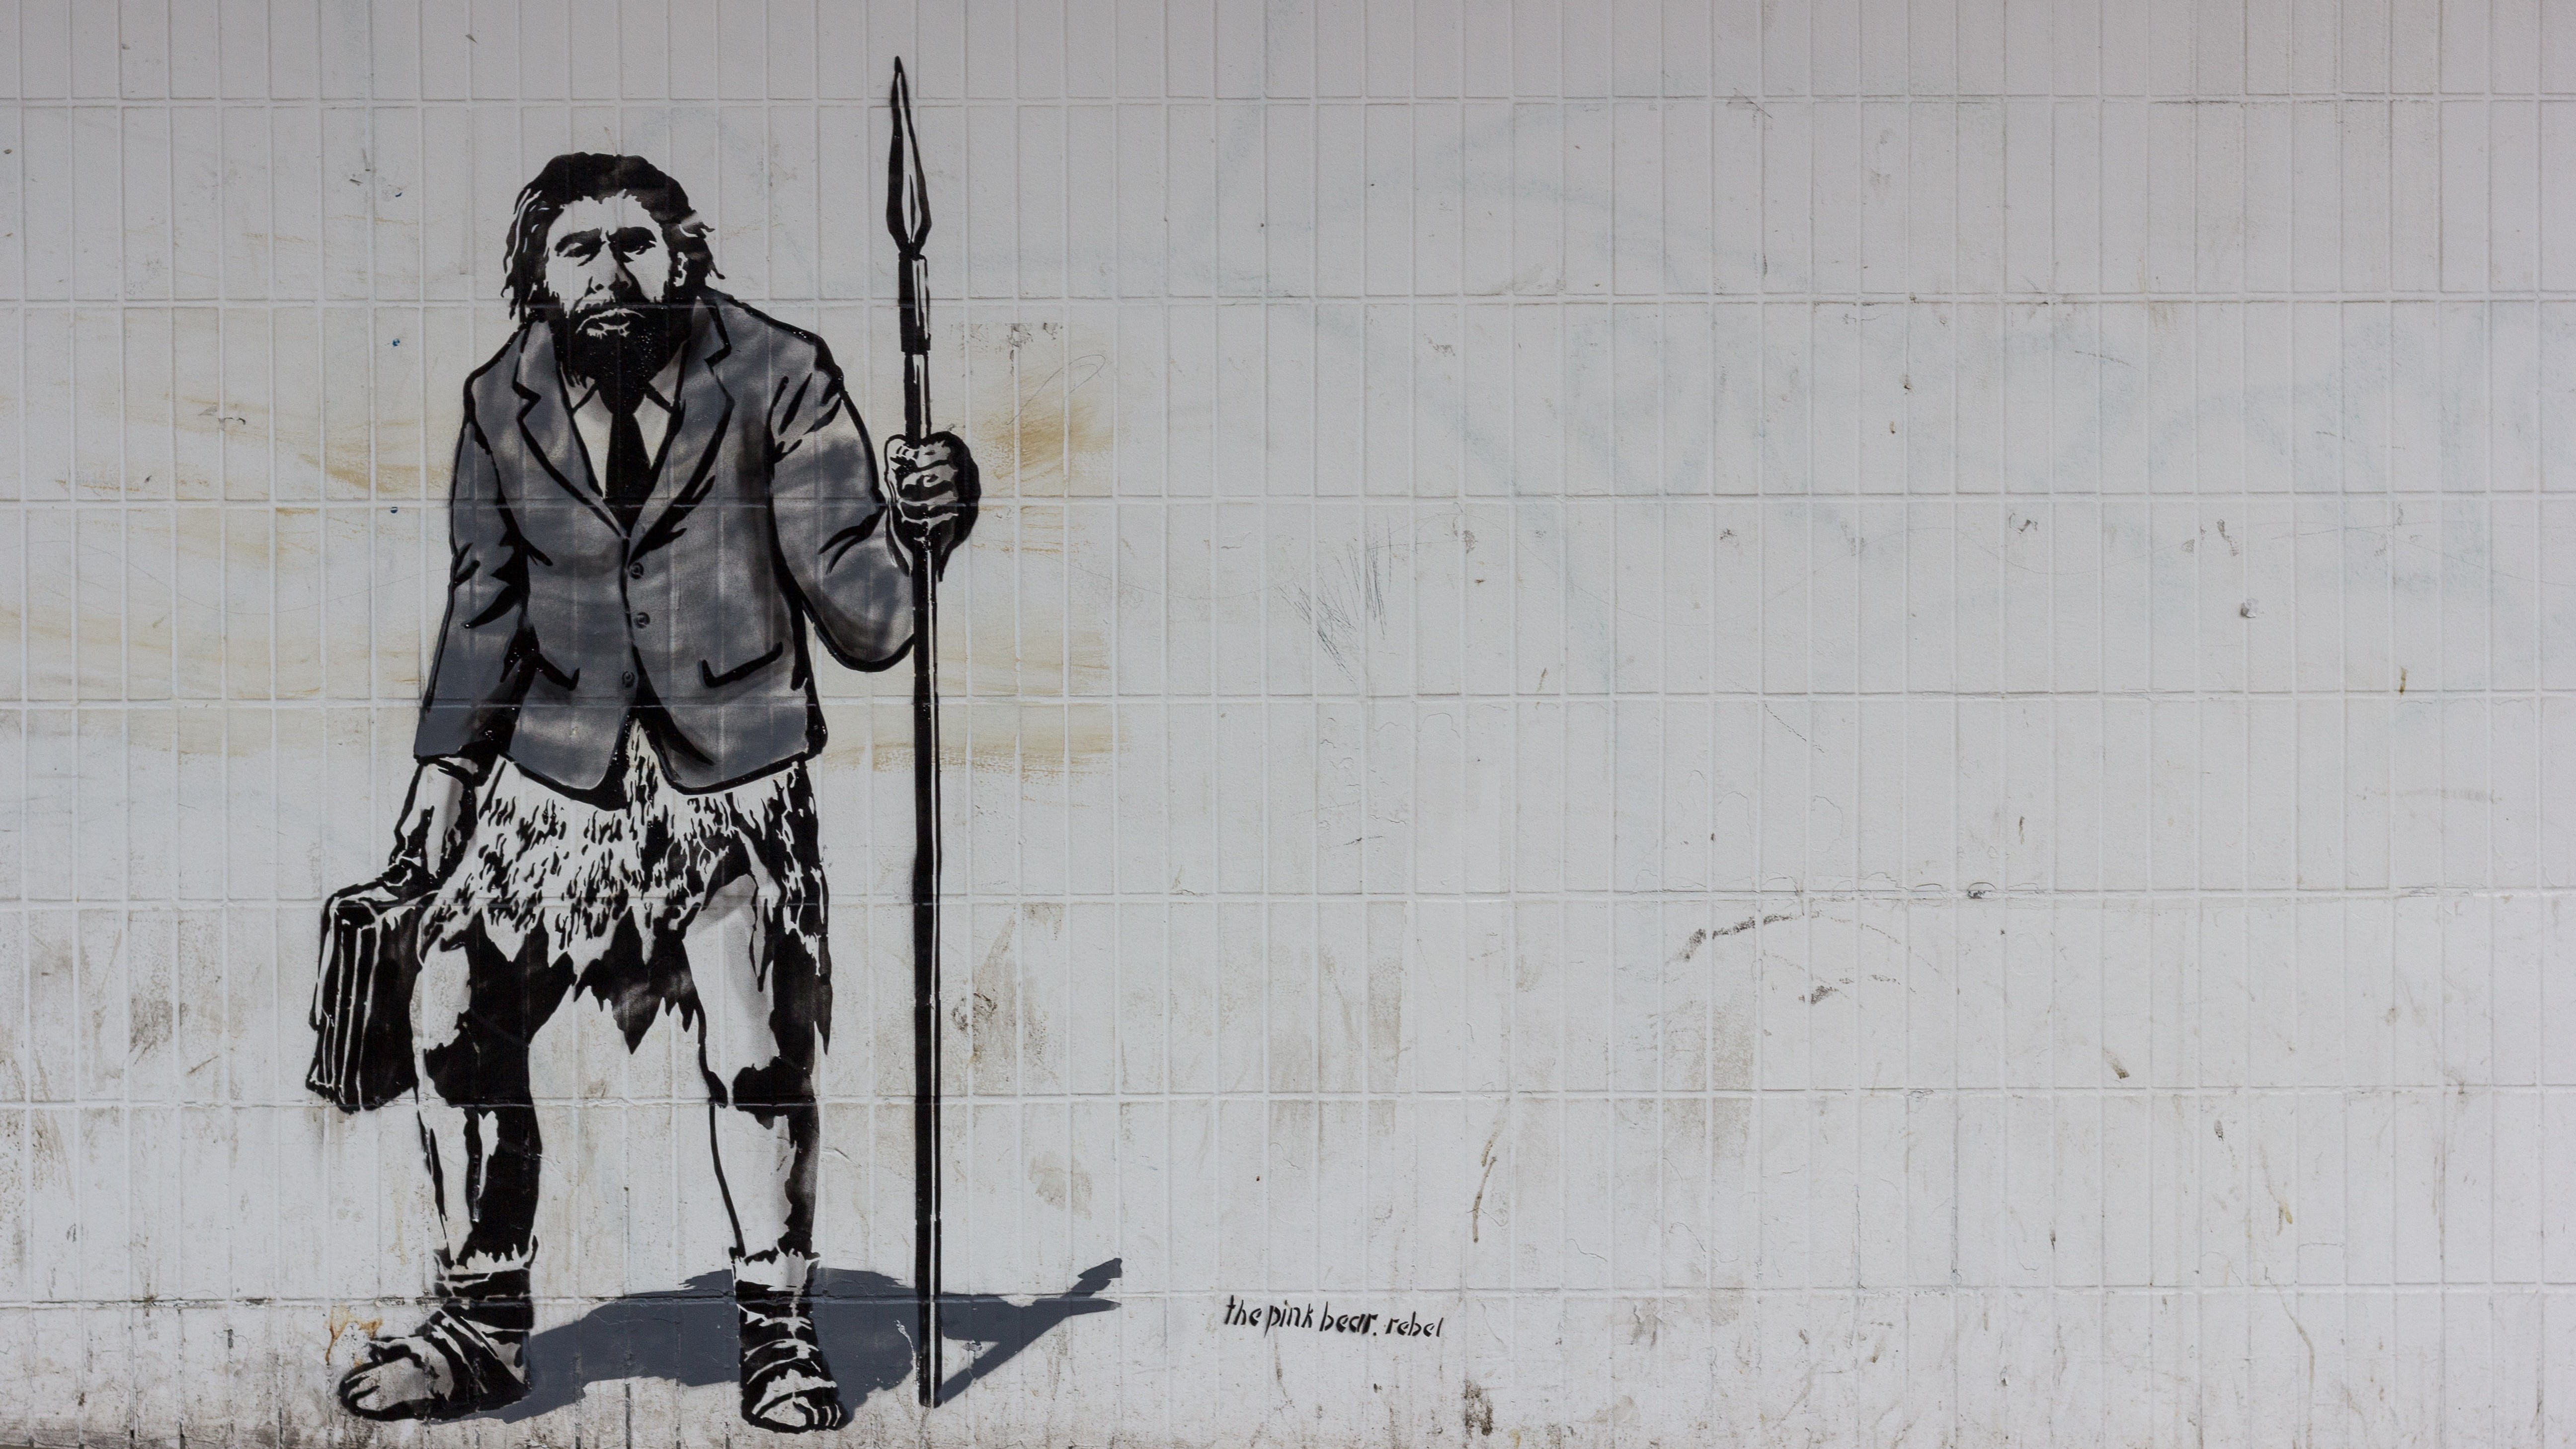 A Neanderthal man holding a briefcase in one hand and a spear in the other.